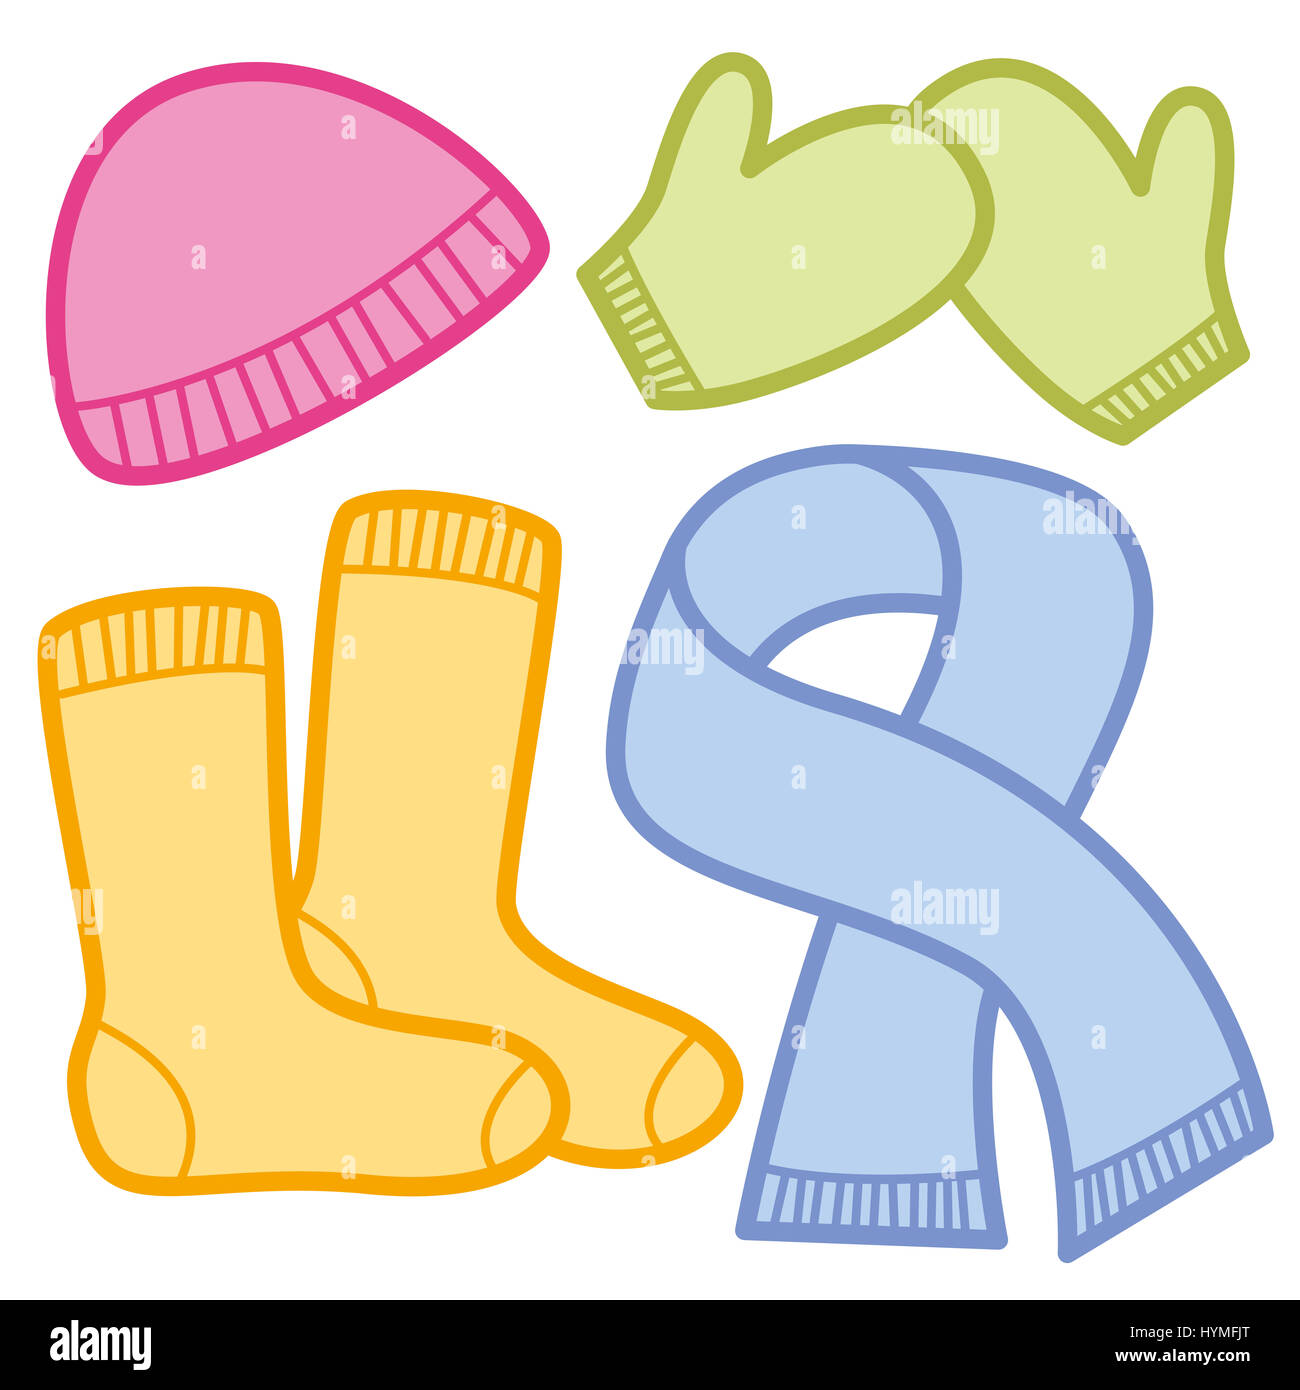 Winter clothing comic icons - colorful cloths for cold weather - pink woolen cap, green mittens, orange socks and blue scarf. Illustration. Stock Photo